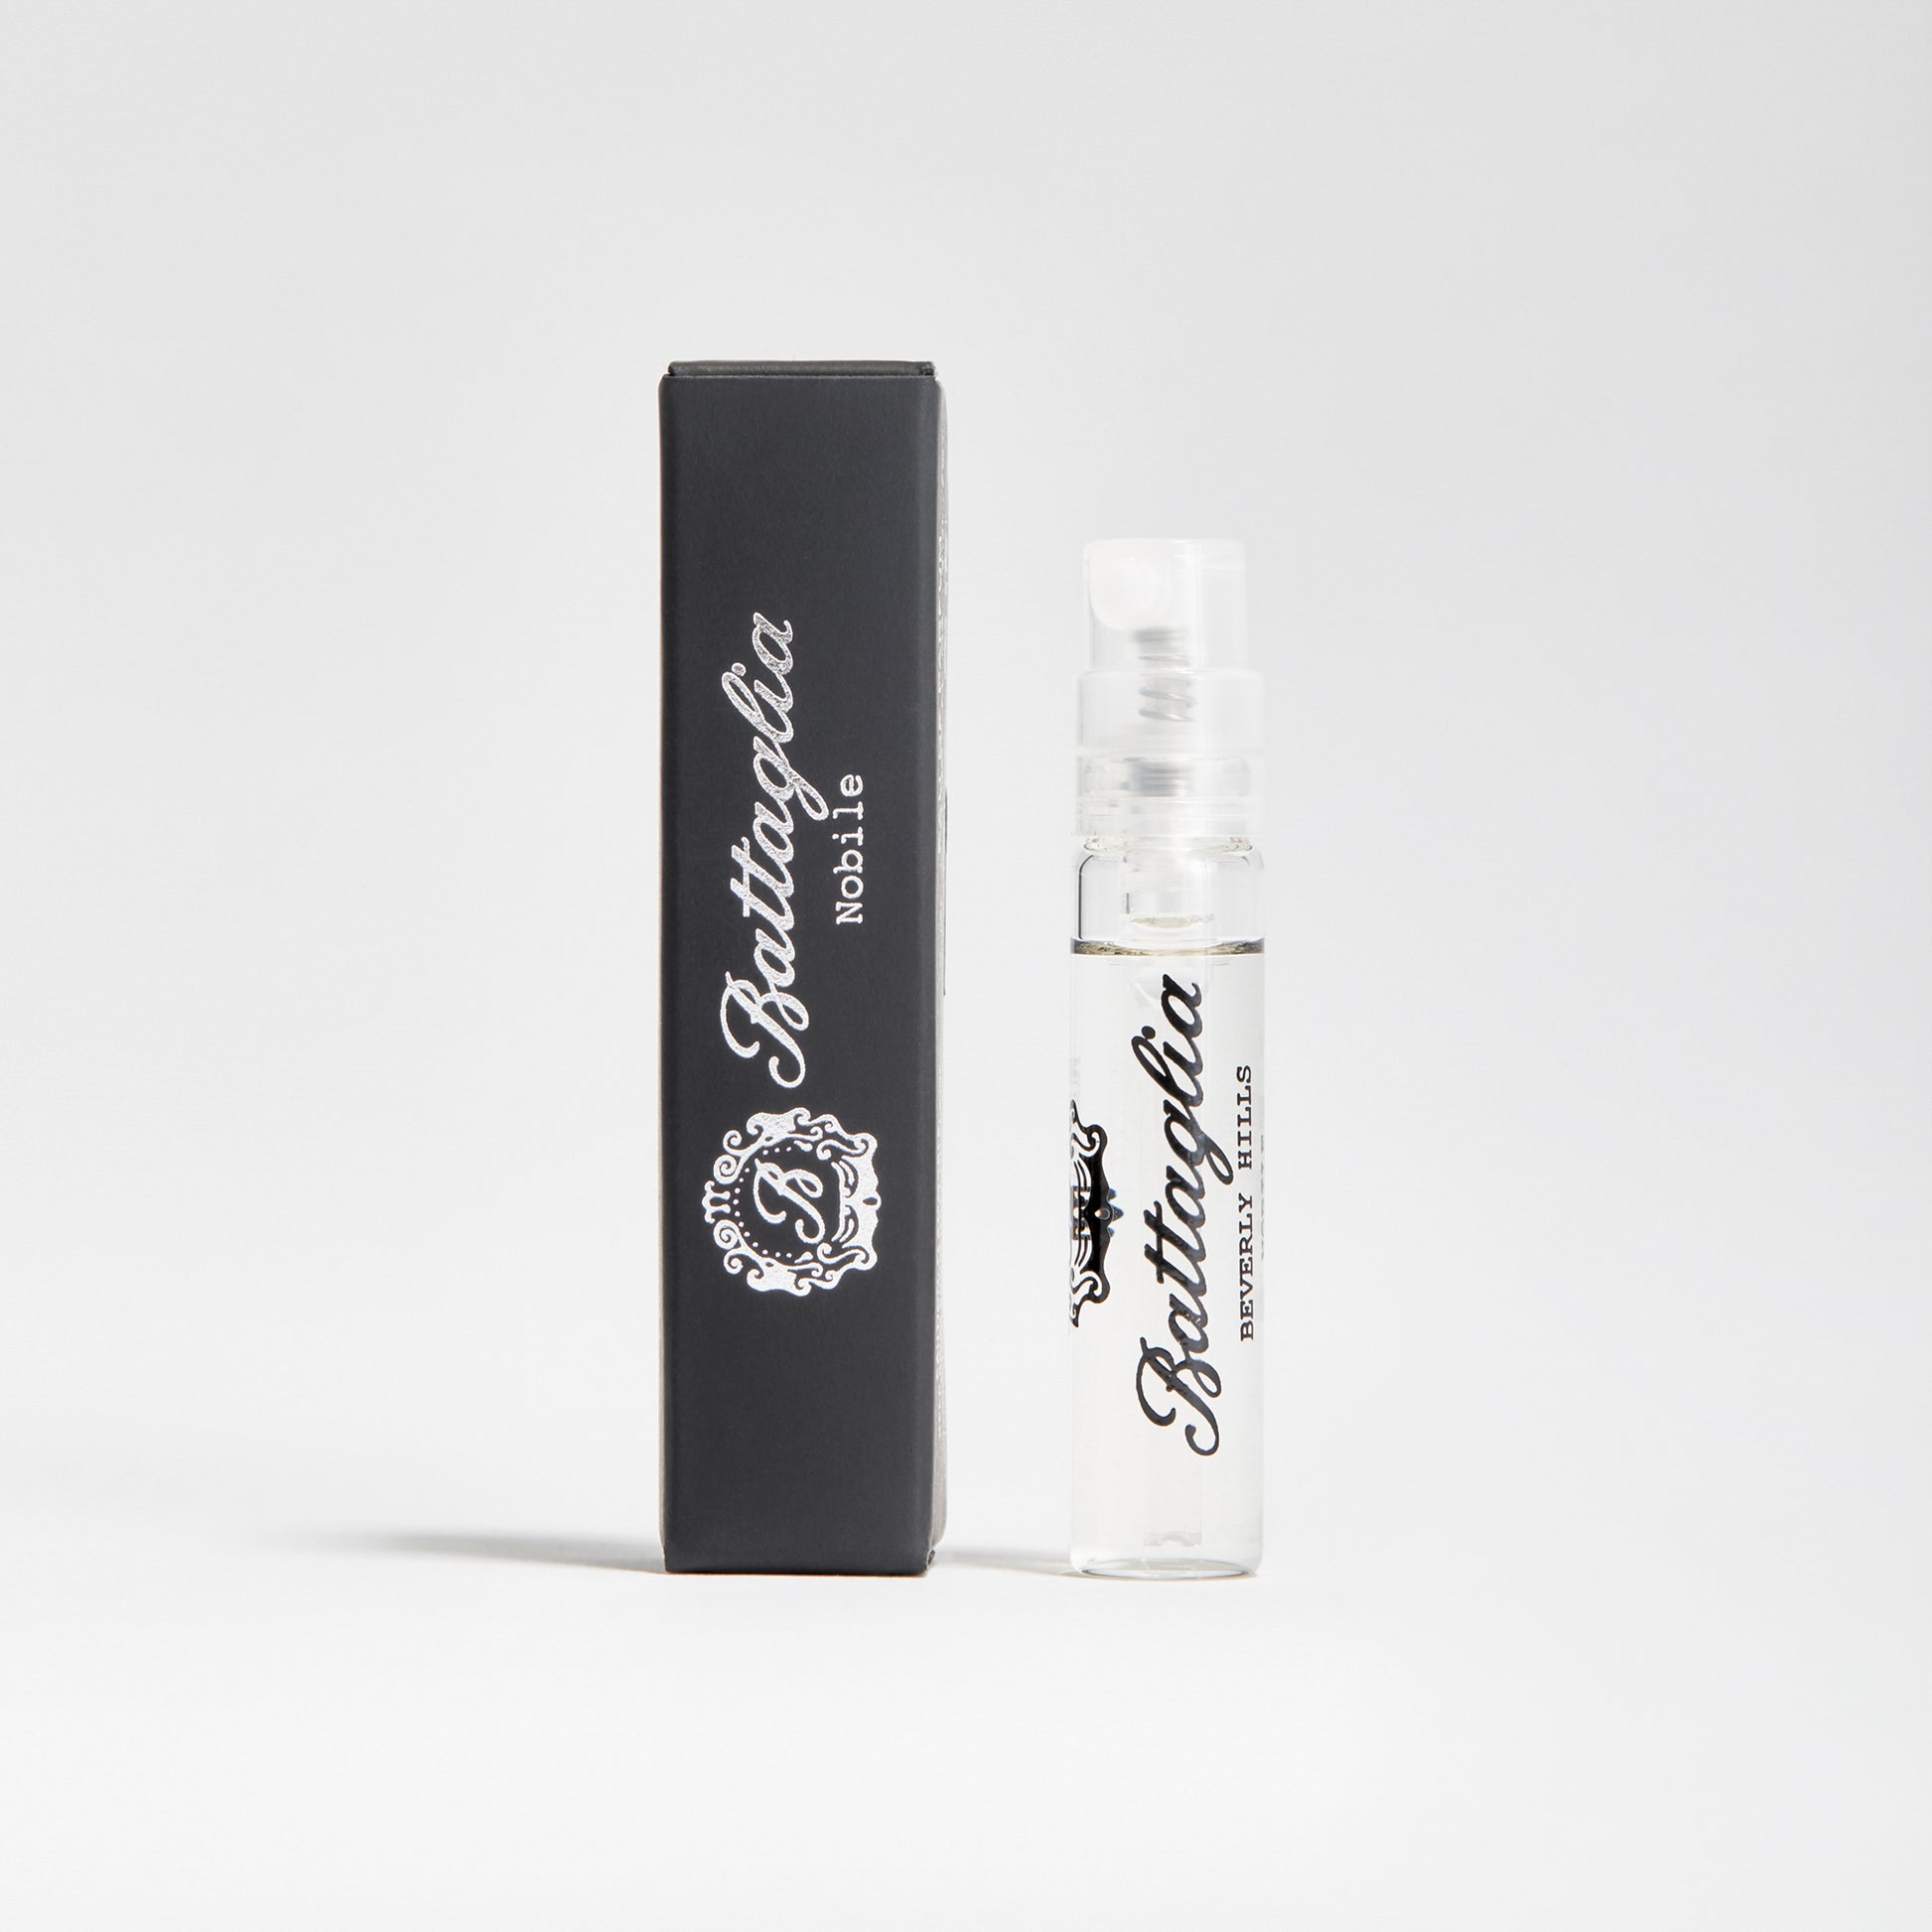 A photo of the Nobile fragrance sample by Battaglia. The sample is standing upright next to the black box it is packaged in against a white background.